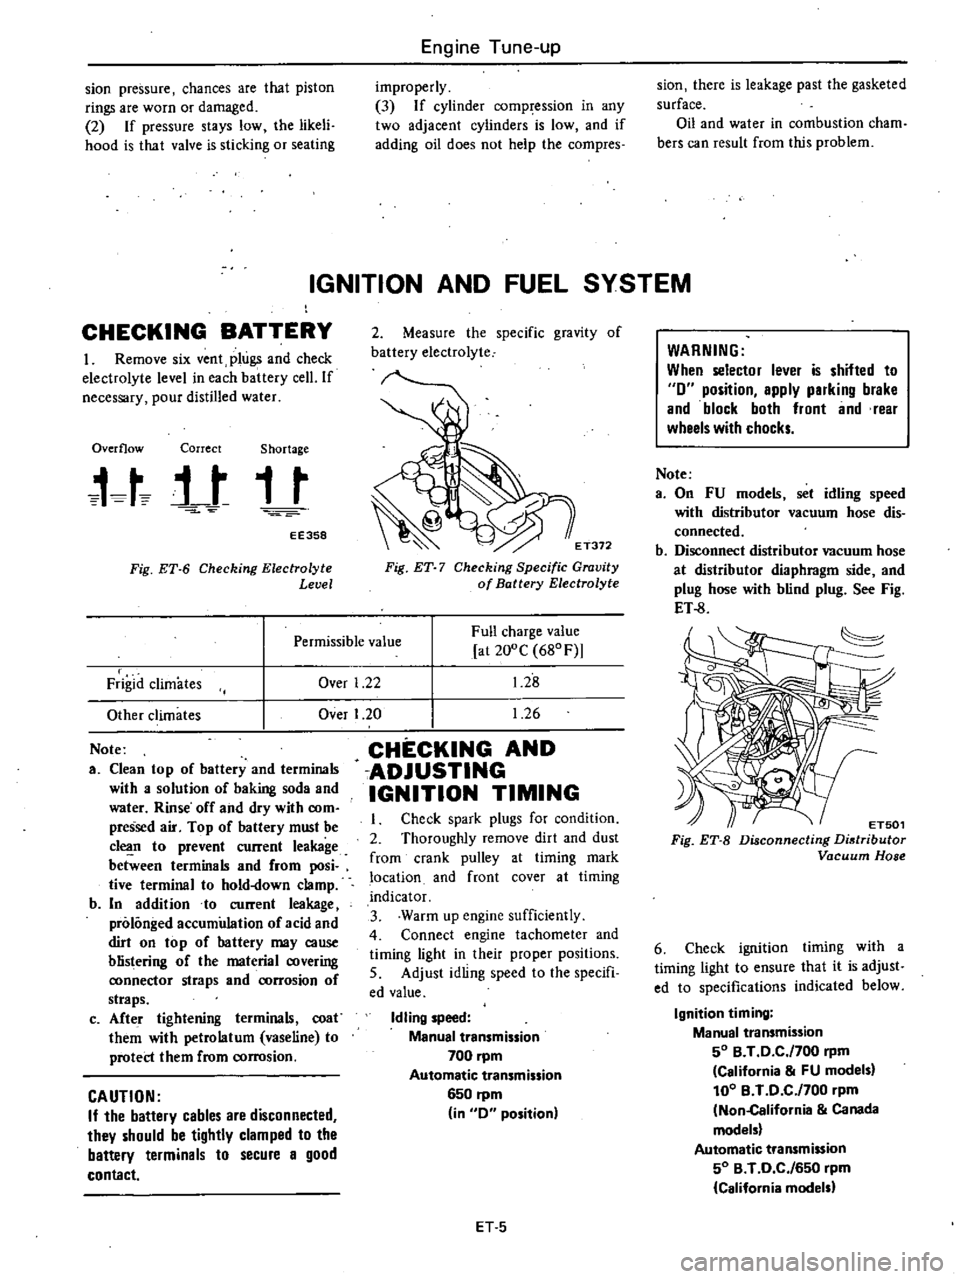 DATSUN 210 1979  Service Manual 
sion

pressure 
chances 
are

that

piston

rings 
are

worn 
or 
damaged

2

If

pressure 
stays 
low

the 
likeli

hood 
is 
that 
valve 
is

sticking 
or

seating 
Engine 
Tune

up

improperly

3
